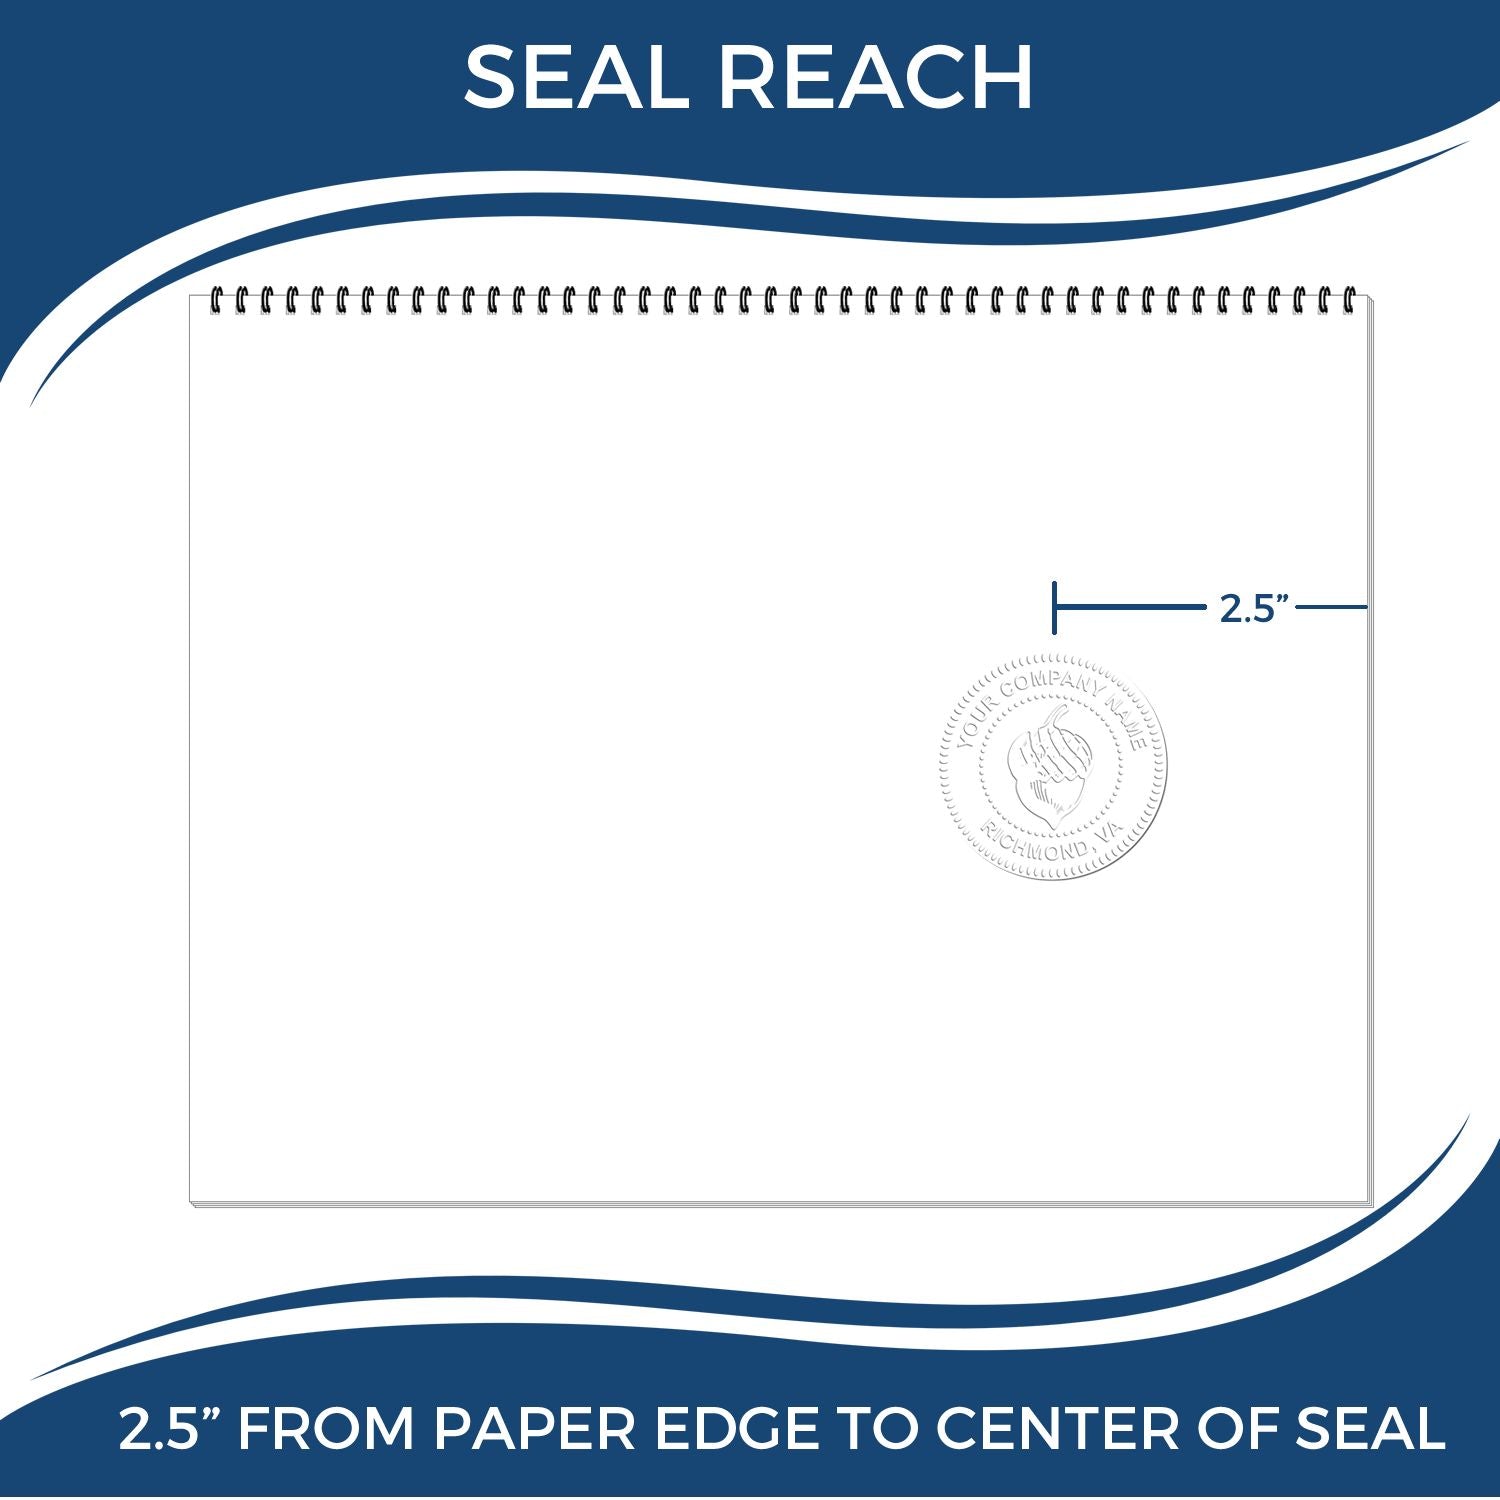 An infographic showing the seal reach which is represented by a ruler and a miniature seal image of the Heavy Duty Cast Iron Florida Architect Embosser